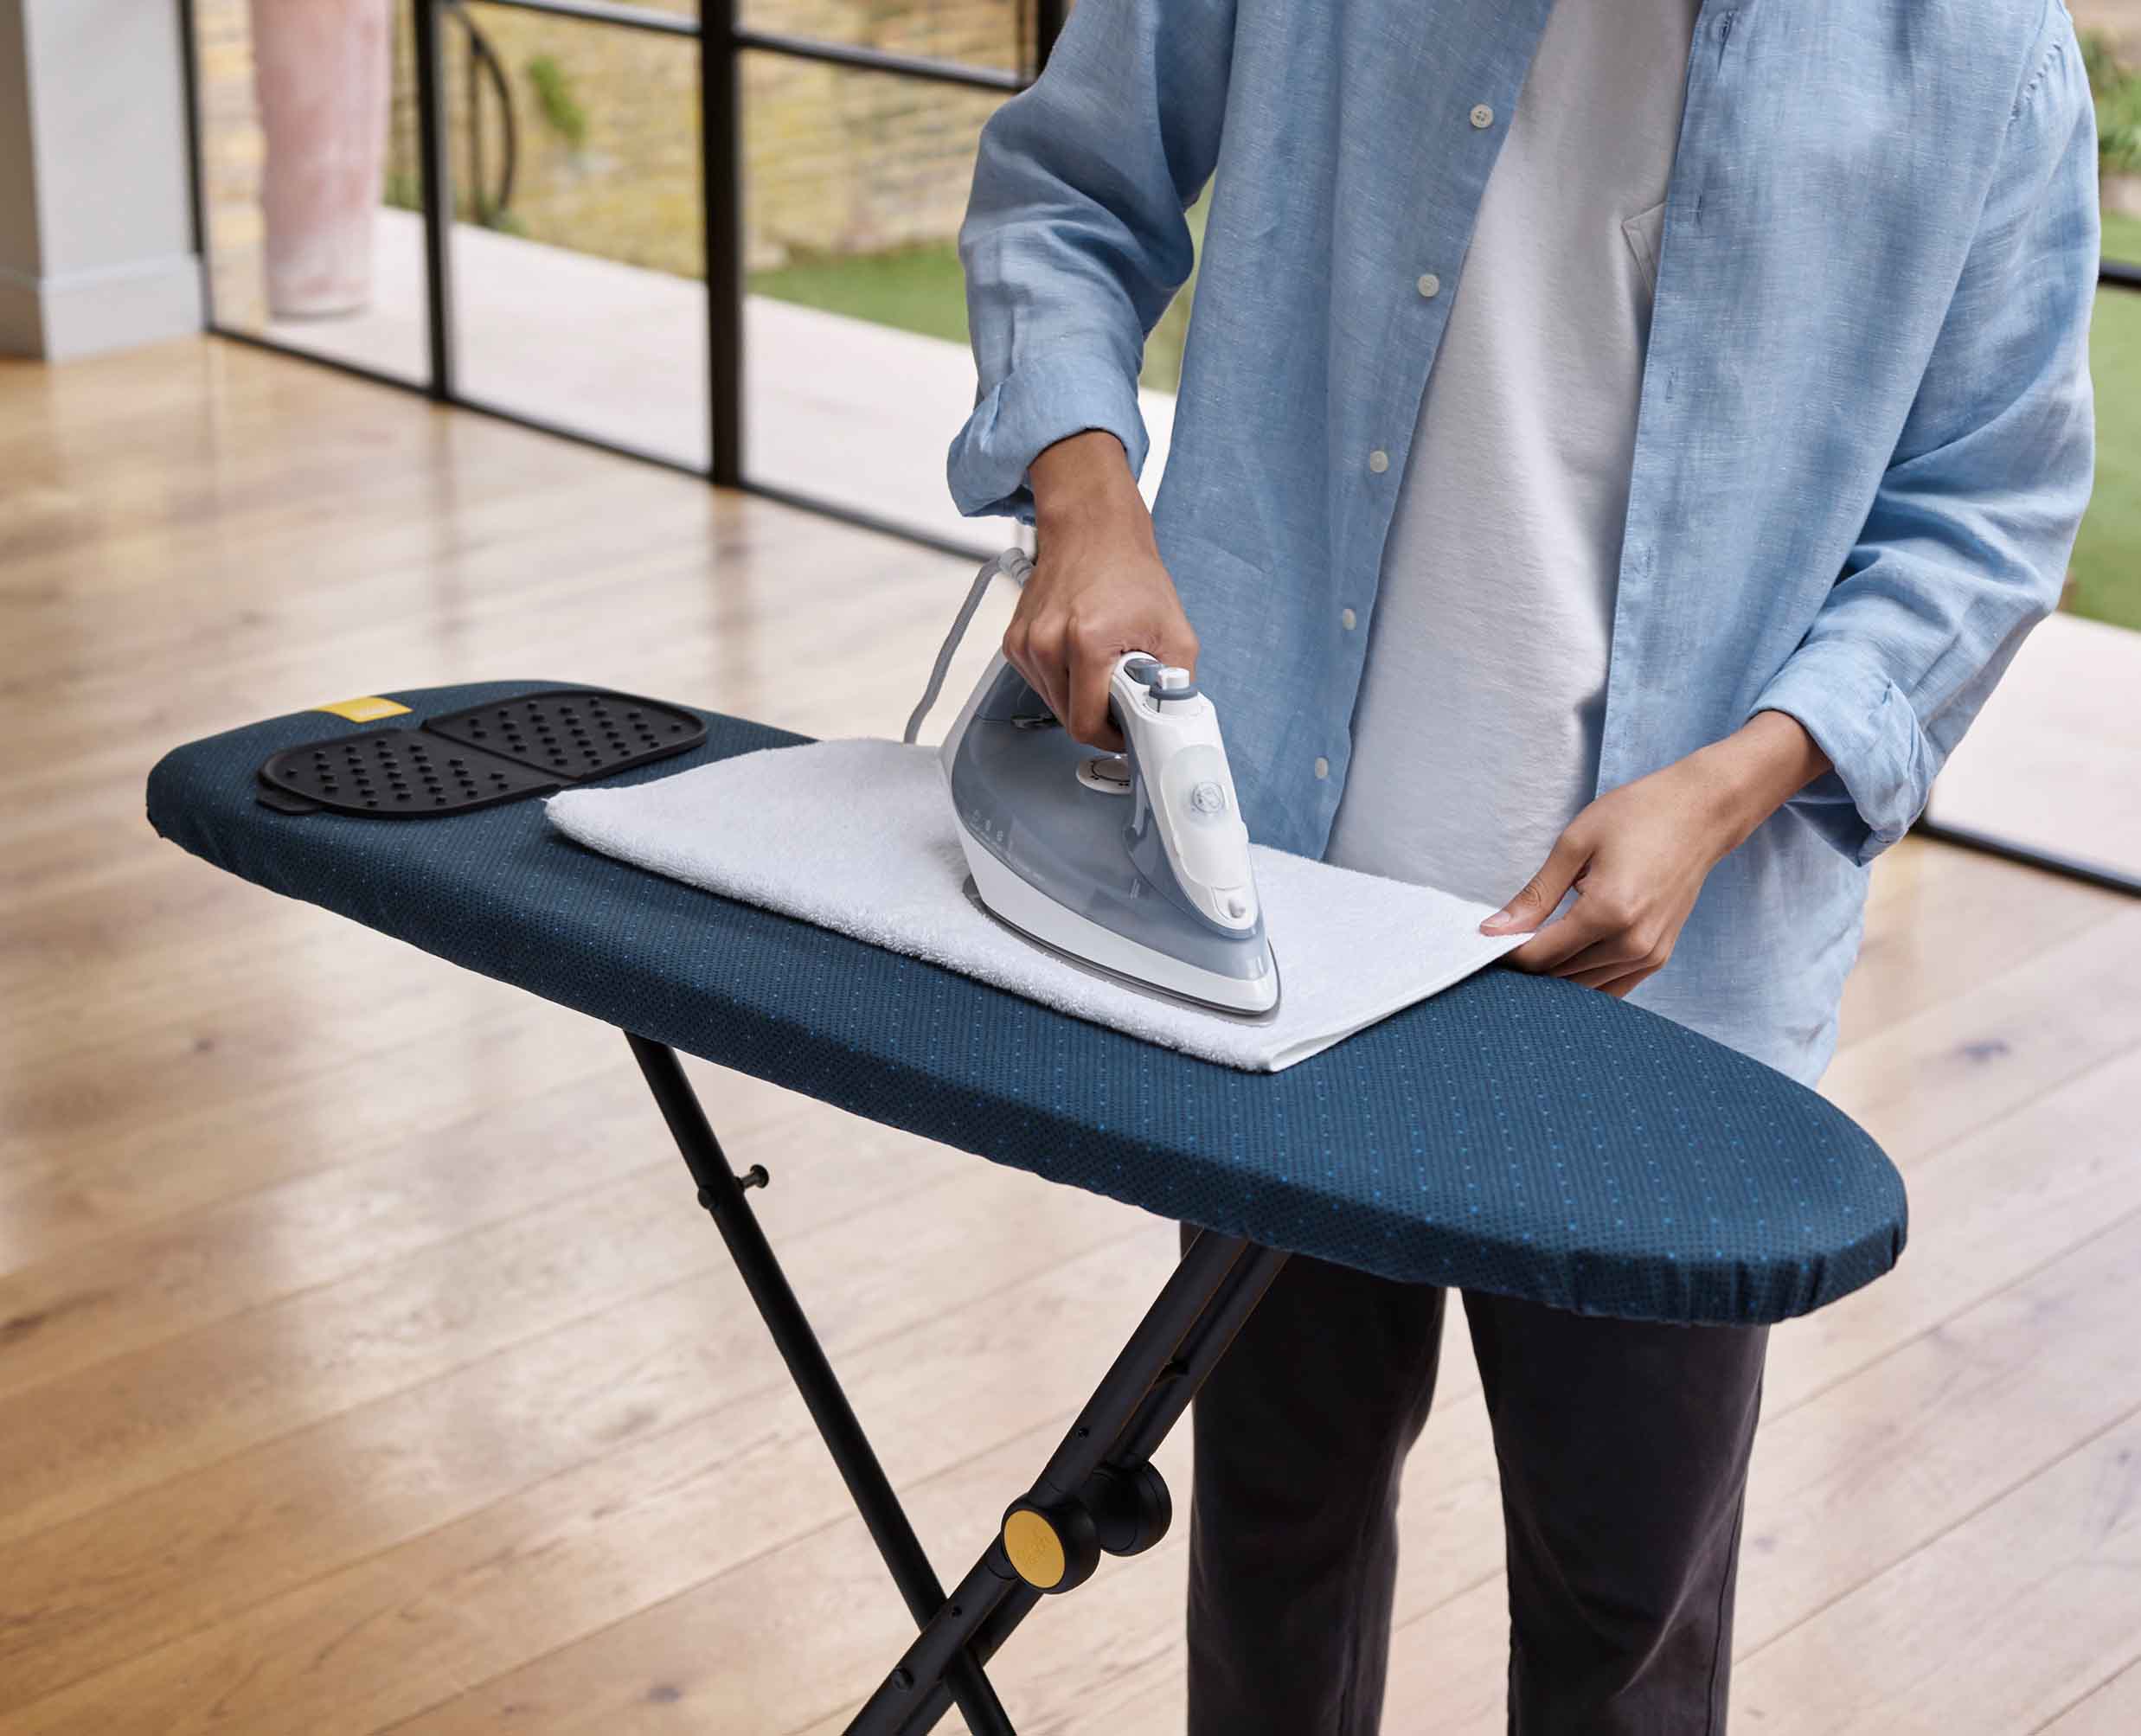 Glide Compact Plus Easy-store Ironing Board - 50028 - Image 3